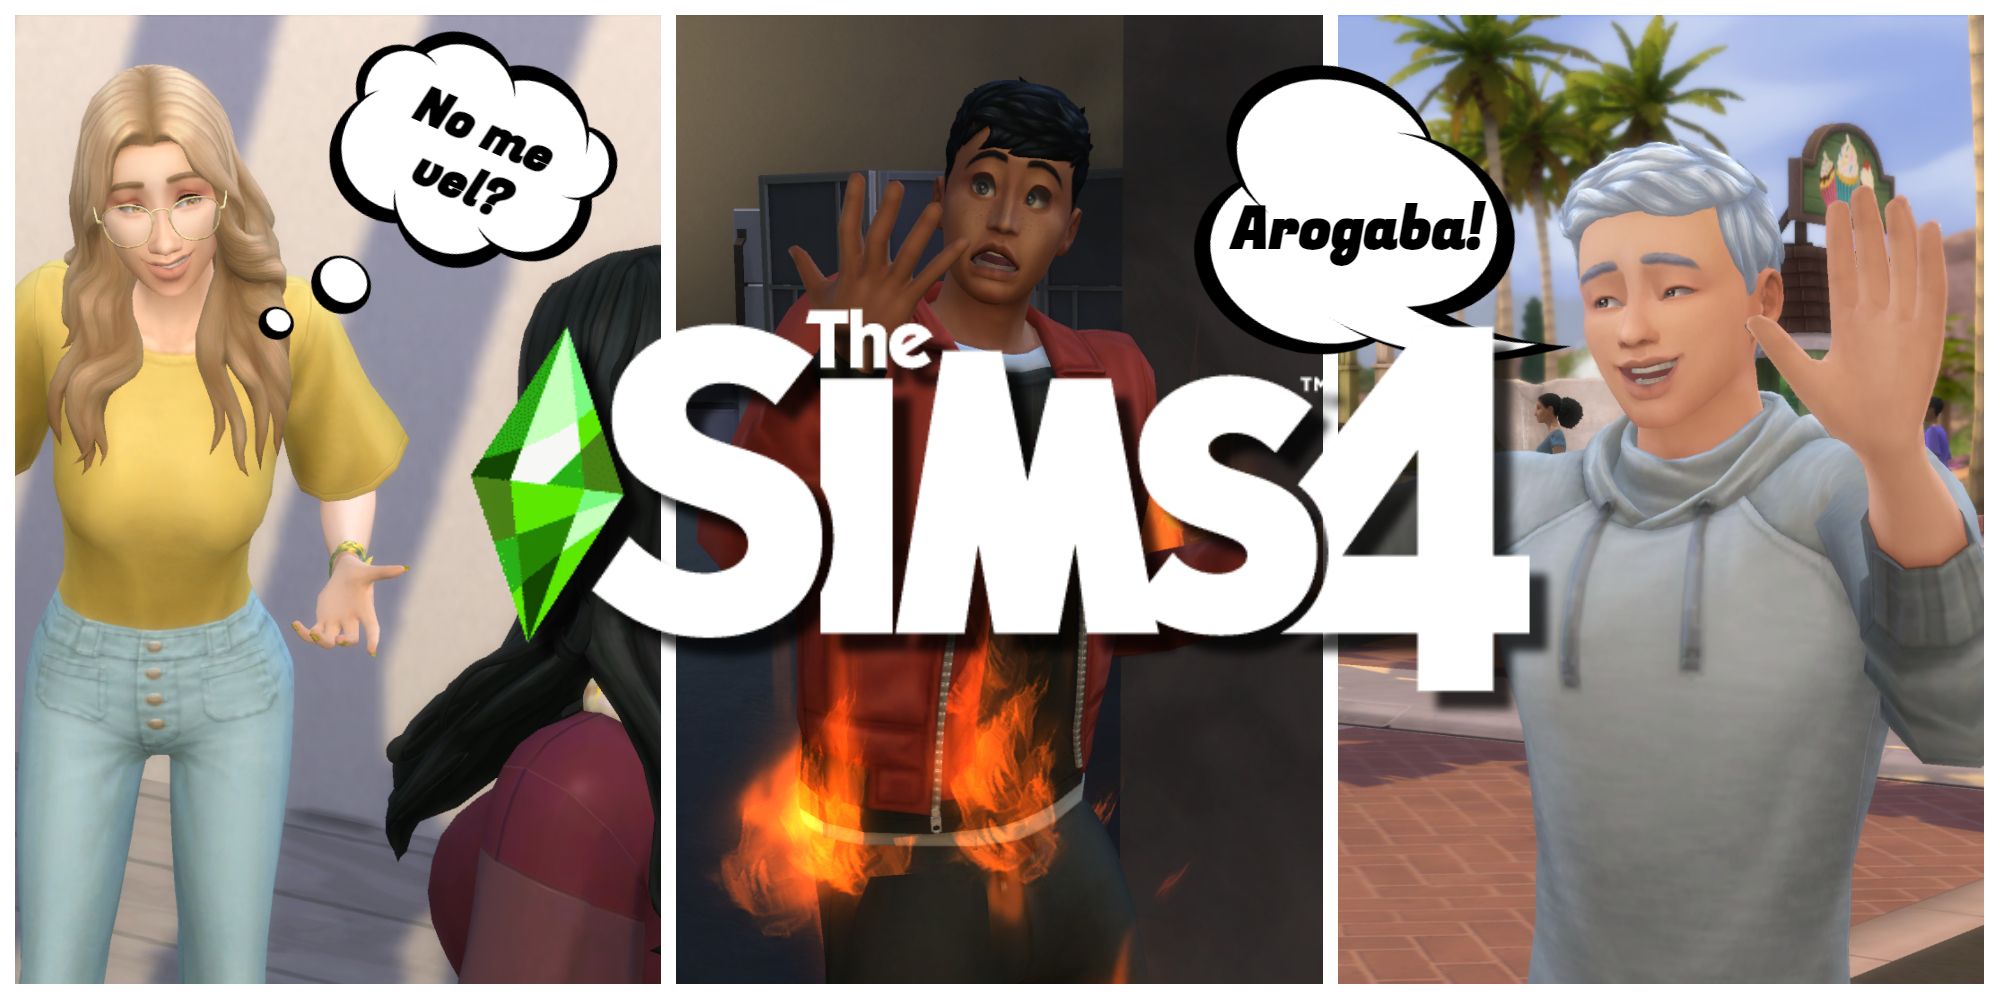 A collage of Sims speaking Simlish, the make-believe language in Sims games